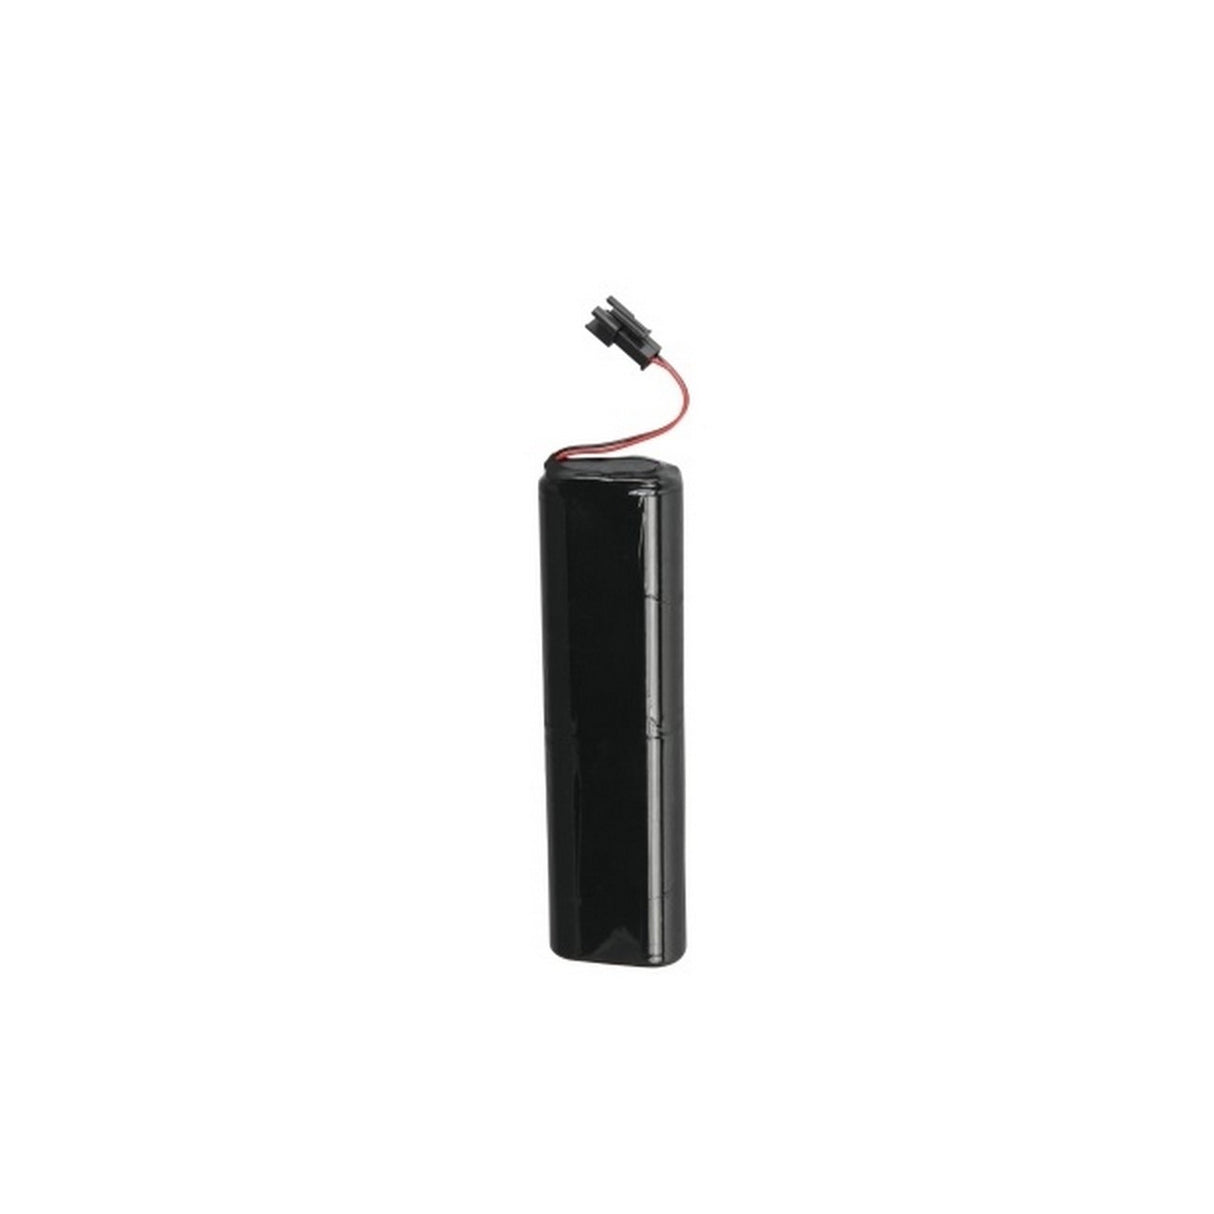 MIPRO MB-10 | 14.8V/2.6 Ah Lithium Rechargeable Battery for MA-100/303